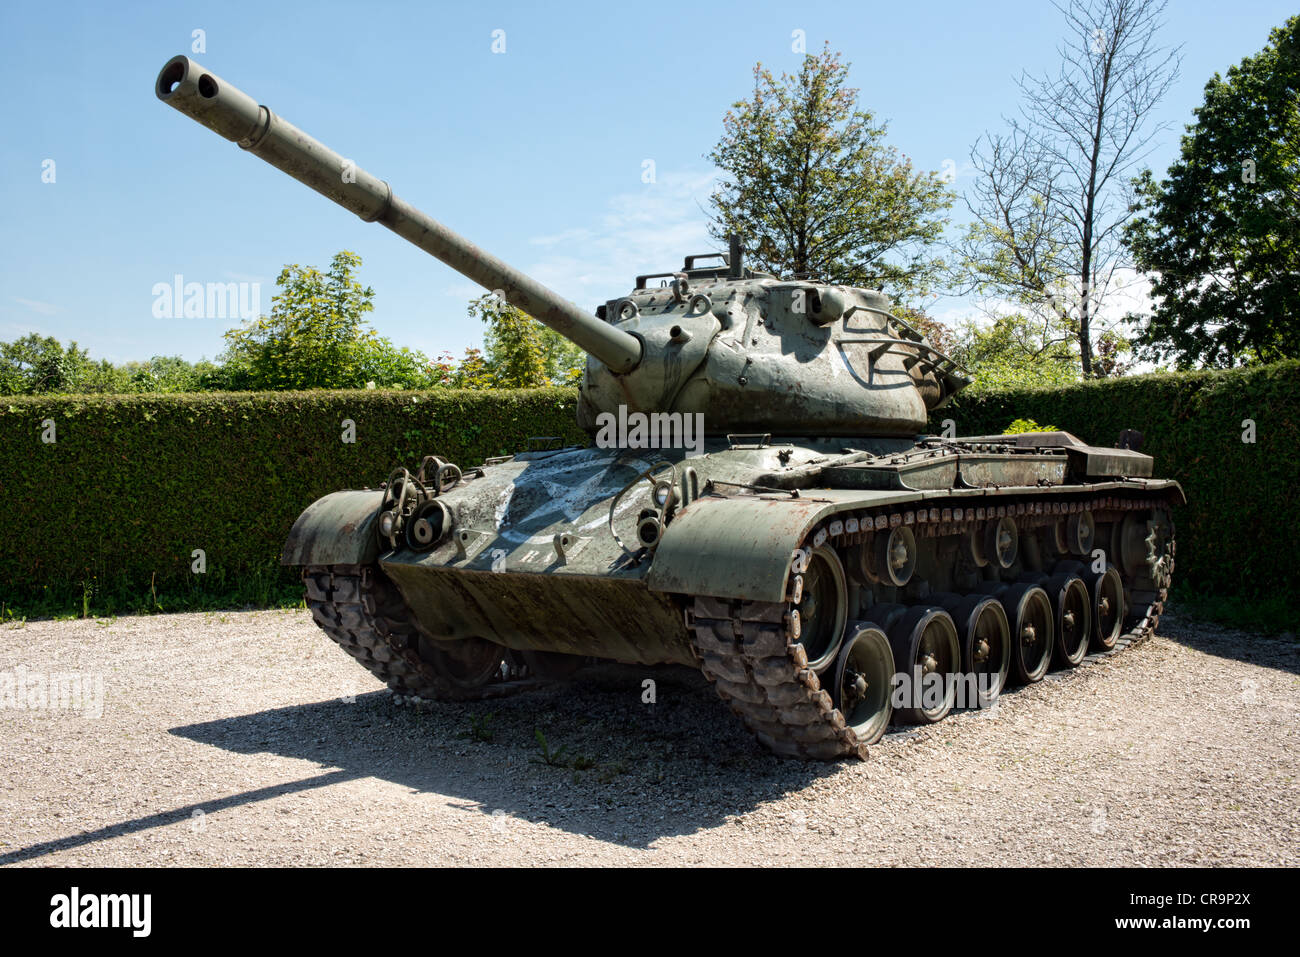 An American M47 Patton tank left in the French village of Valmy Stock Photo